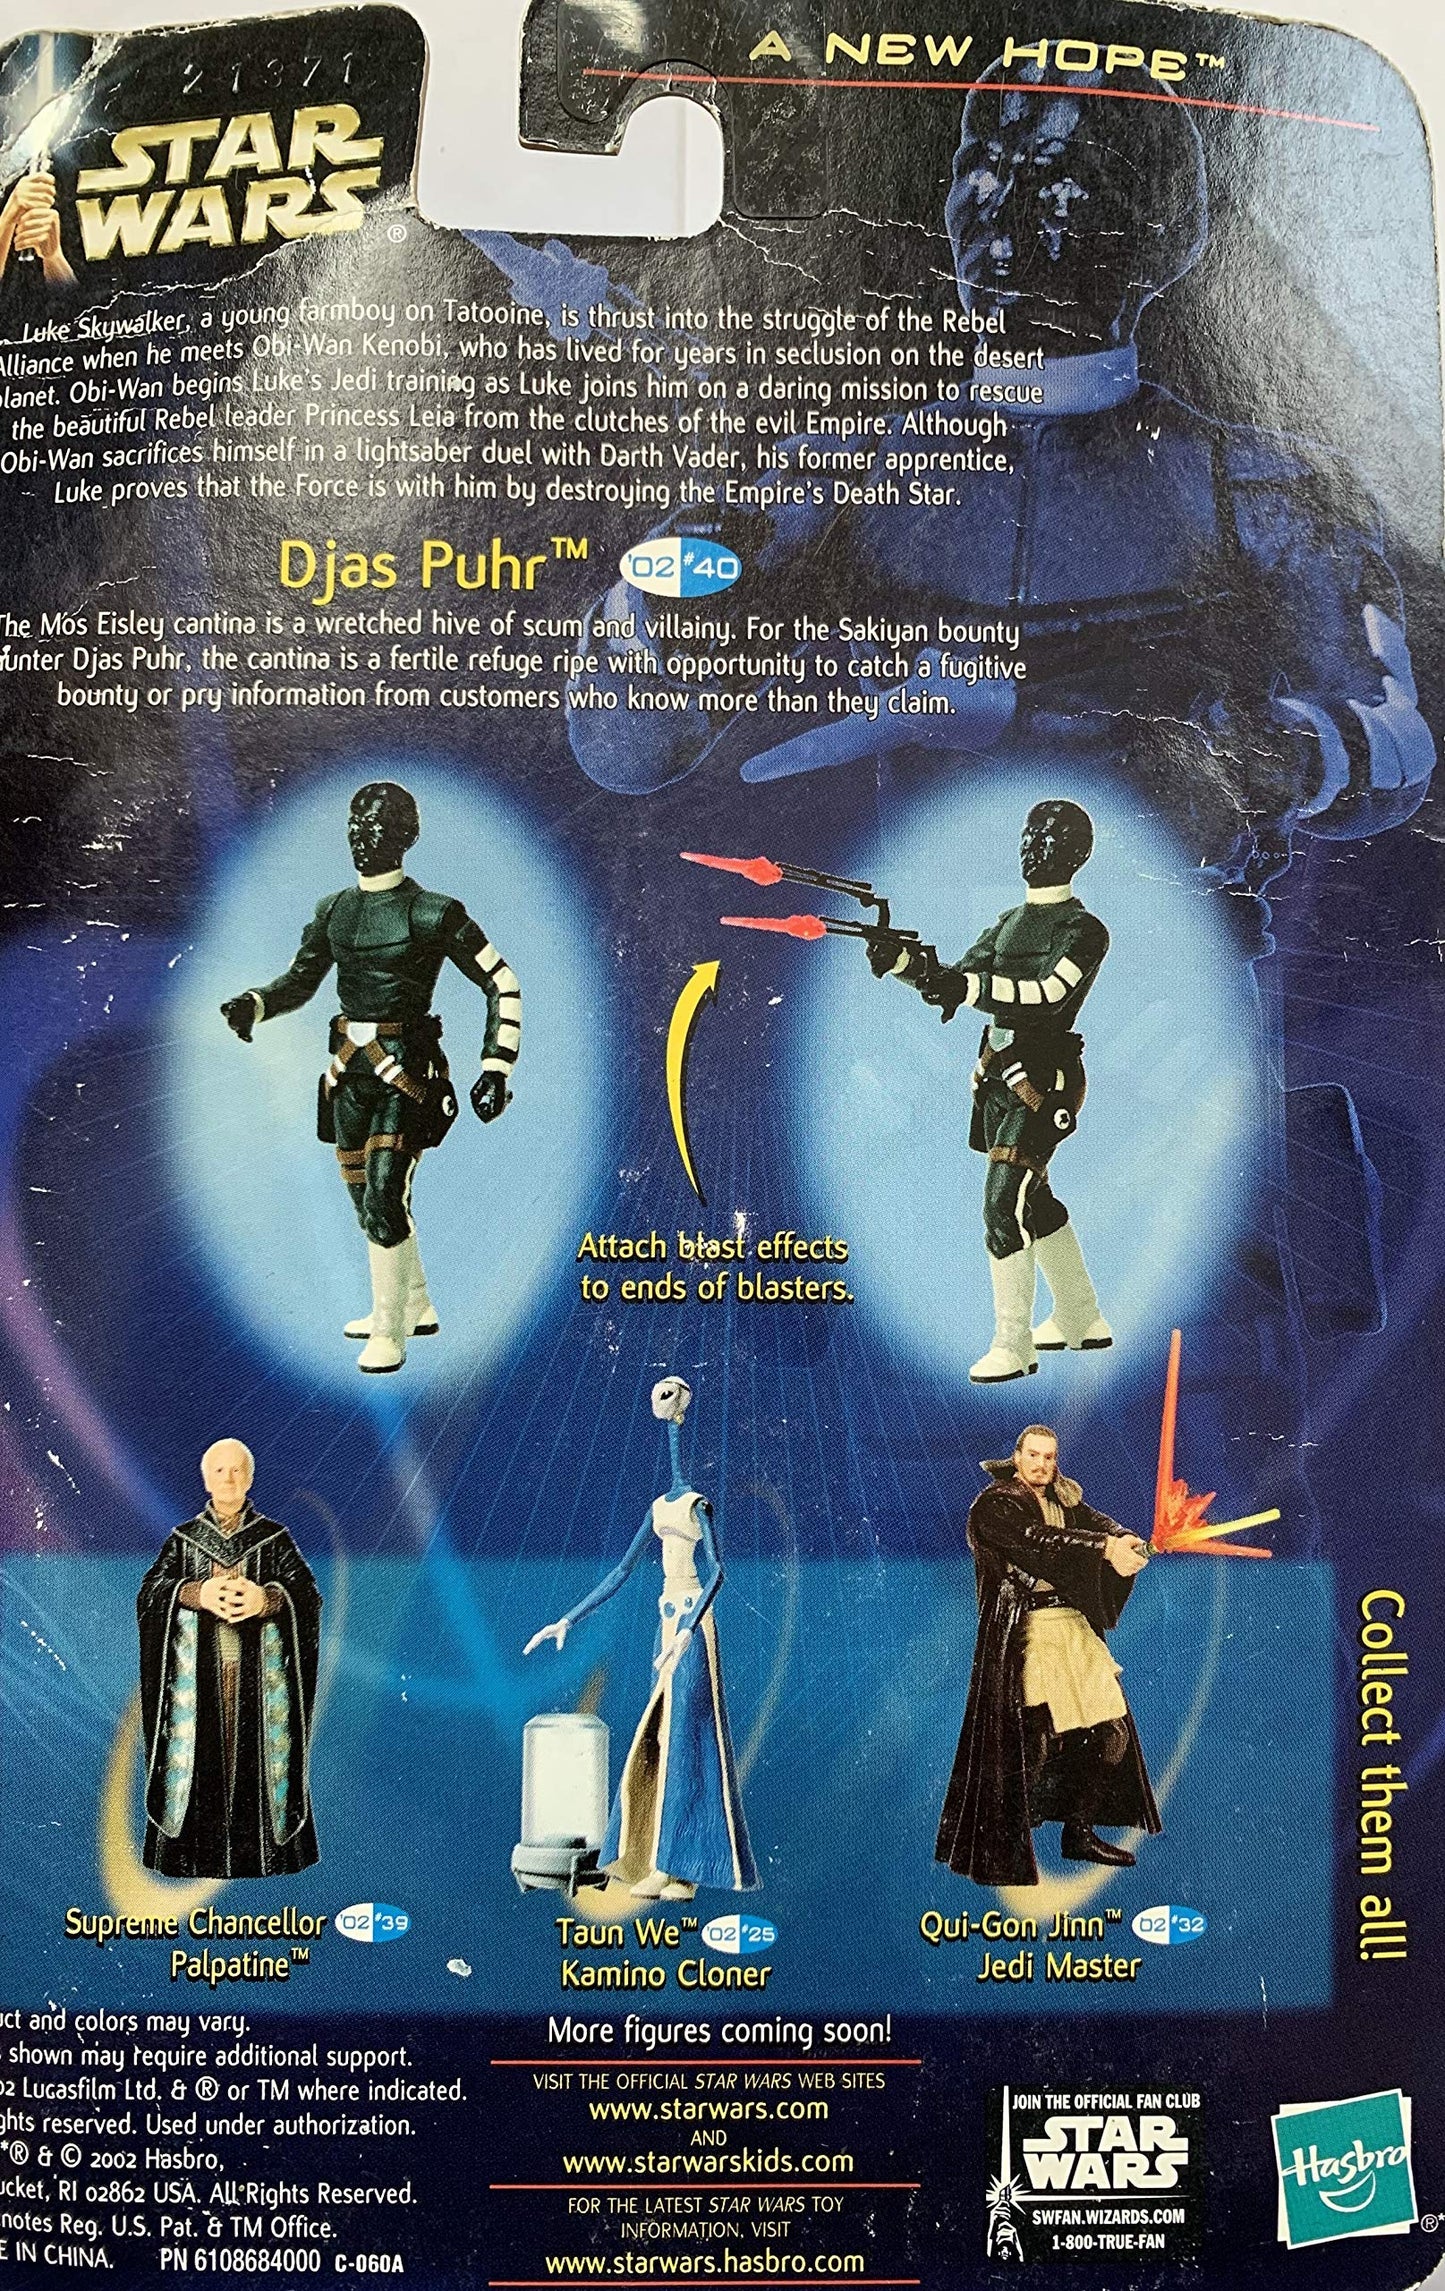 Vintage 2002 Star Wars A New Hope Collection 2 - Djas Puhr Alien Bounty Hunter Action Figure - Brand New Factory Sealed Shop Stock Room Find